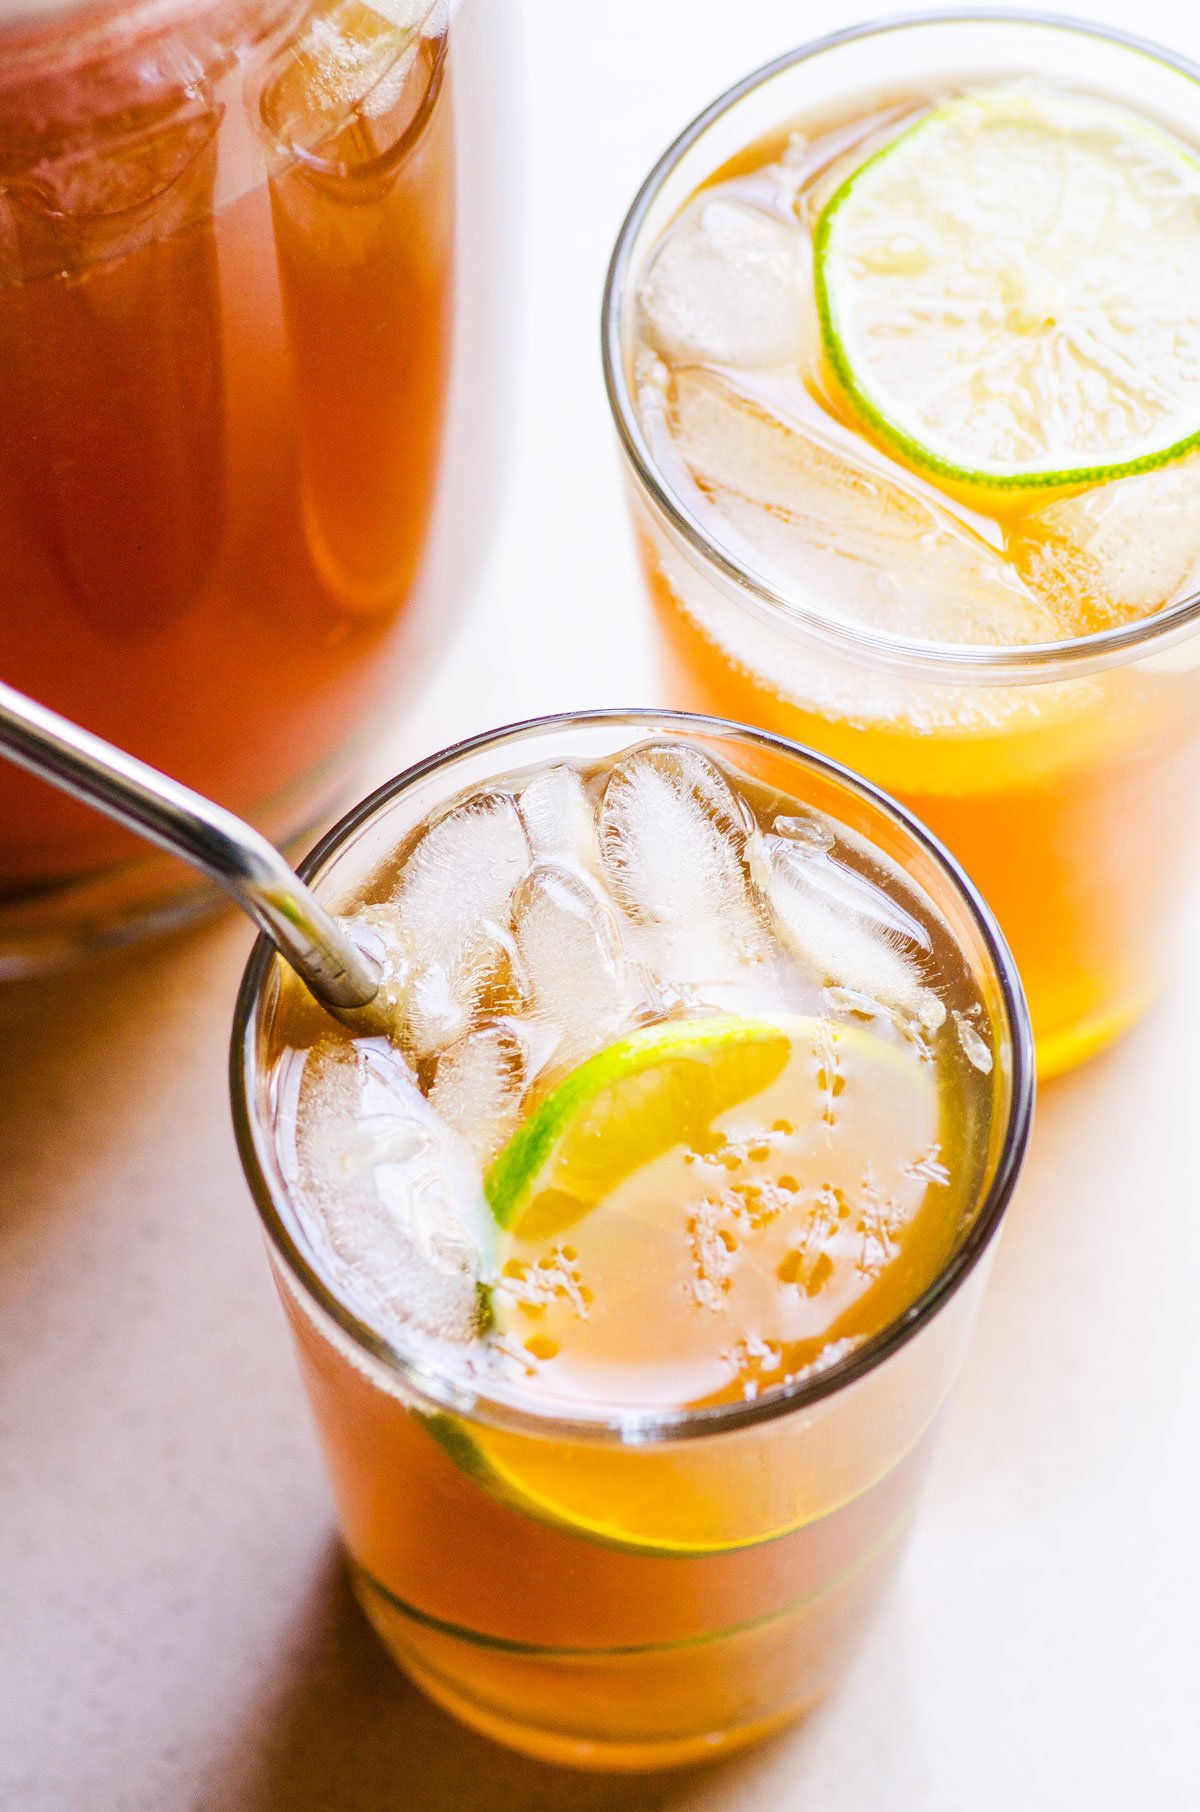 Healthy iced tea in a glass with a lime slice and metal straw.